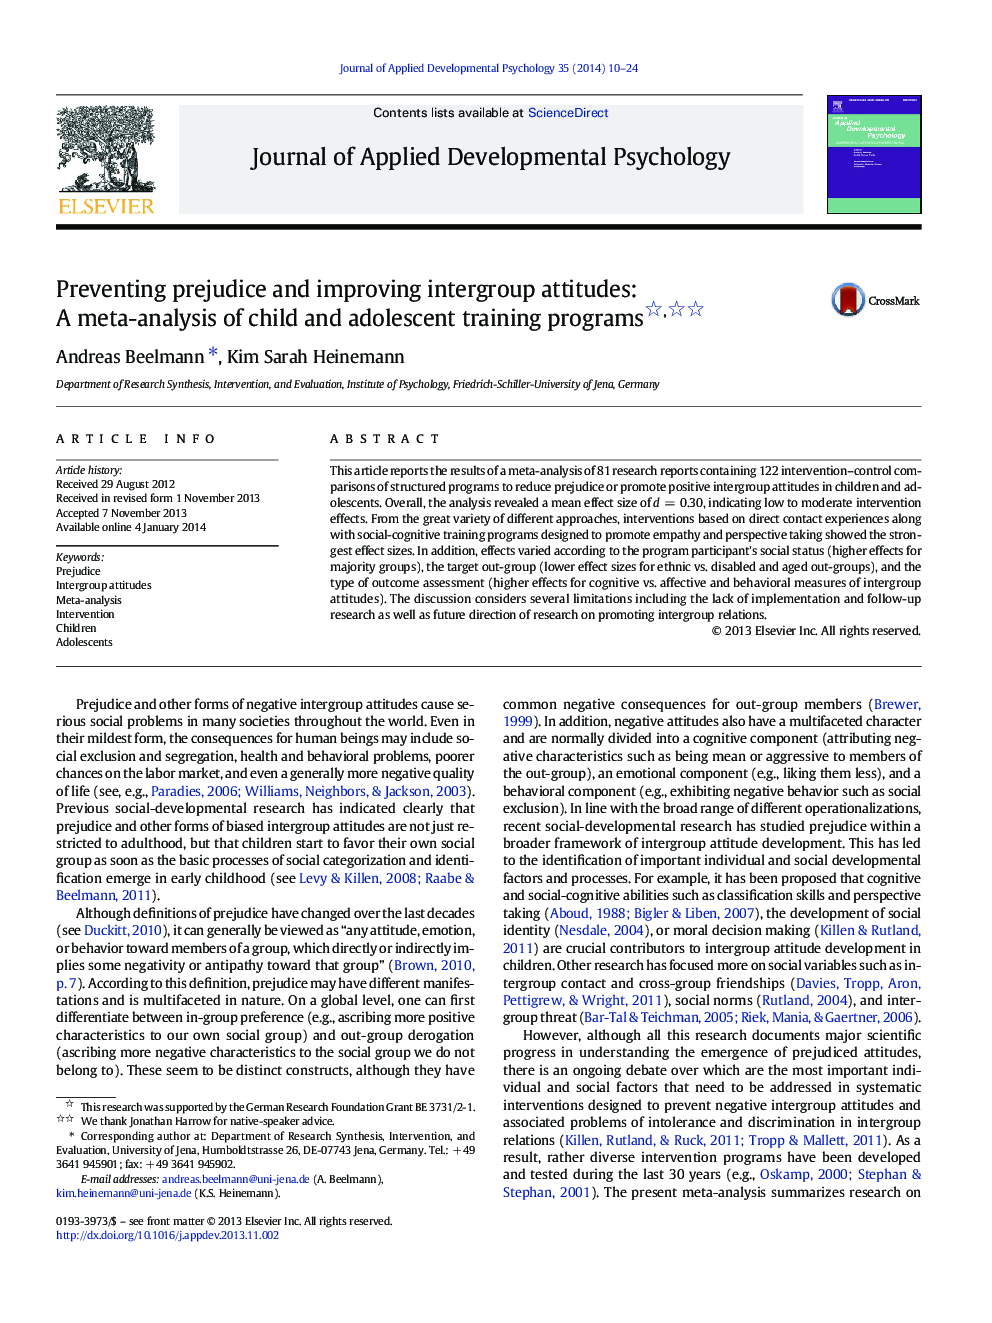 Preventing prejudice and improving intergroup attitudes: A meta-analysis of child and adolescent training programs